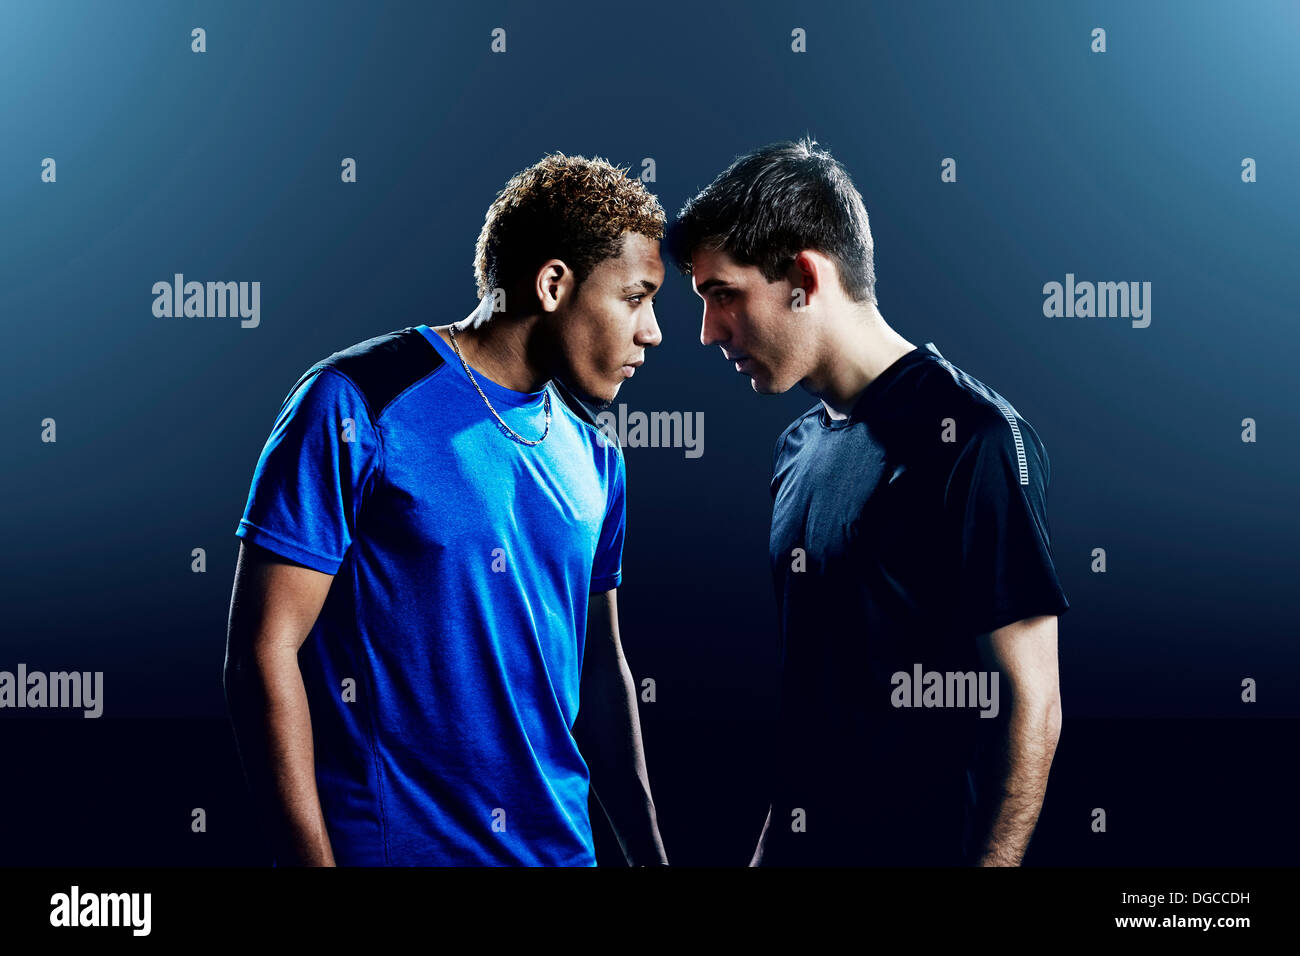 Portrait of two male soccer players head to head Stock Photo